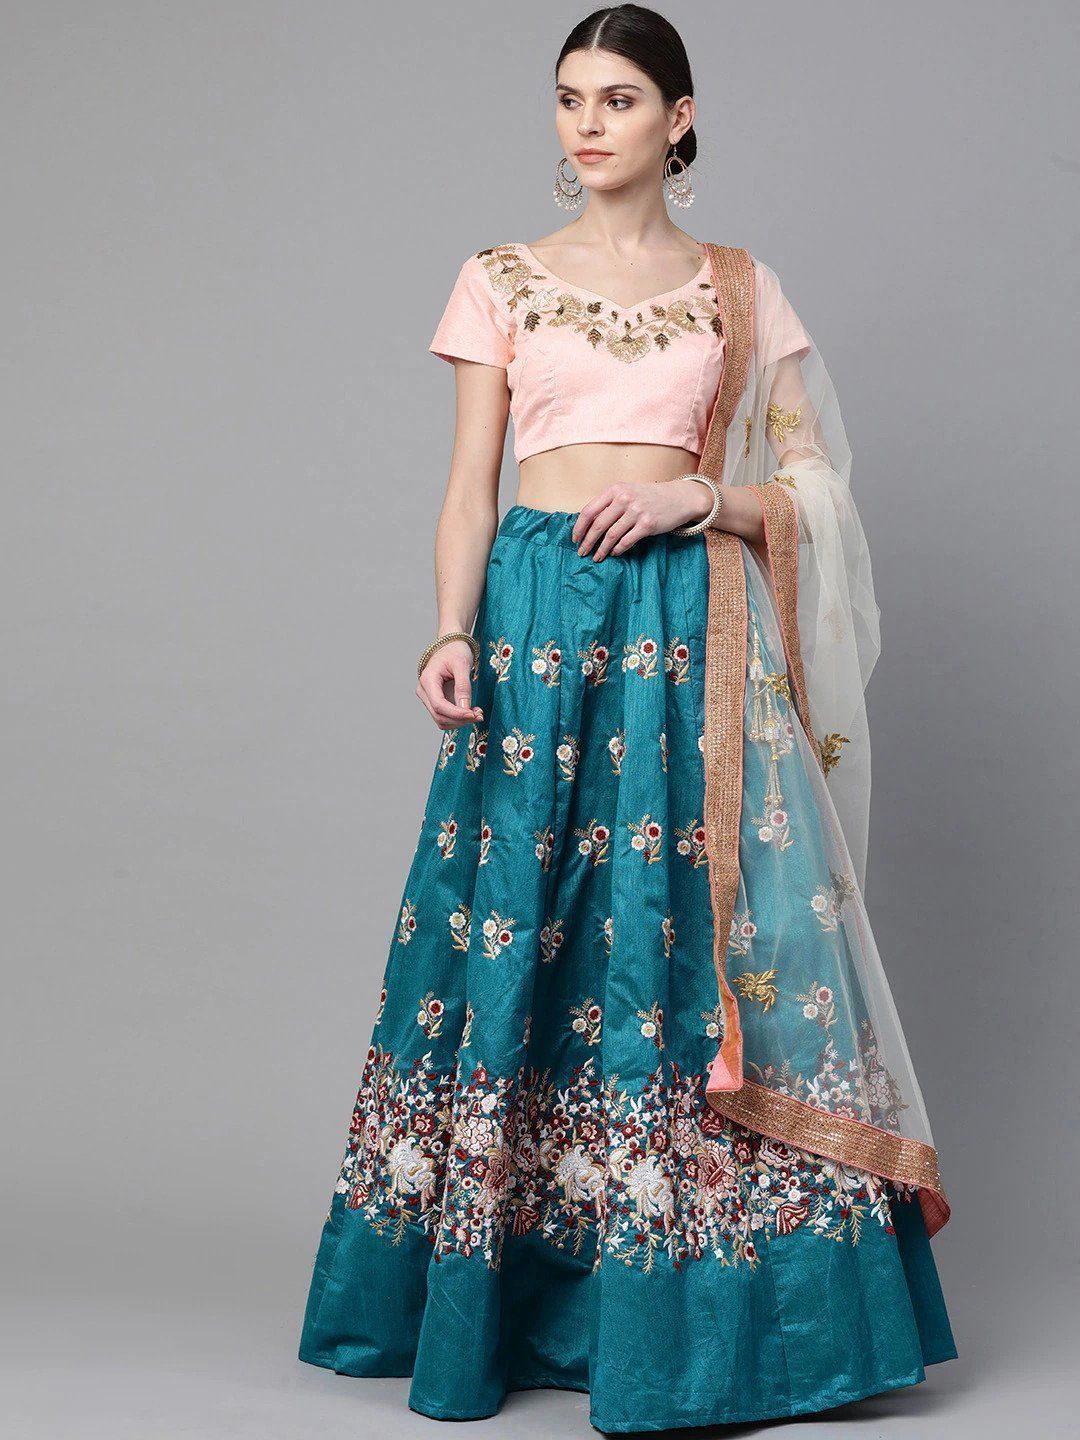 Turquoise Blue & Peach-Coloured Embroidered Semi-Stitched Myntra Lehenga & Unstitched Blouse with Dupatta